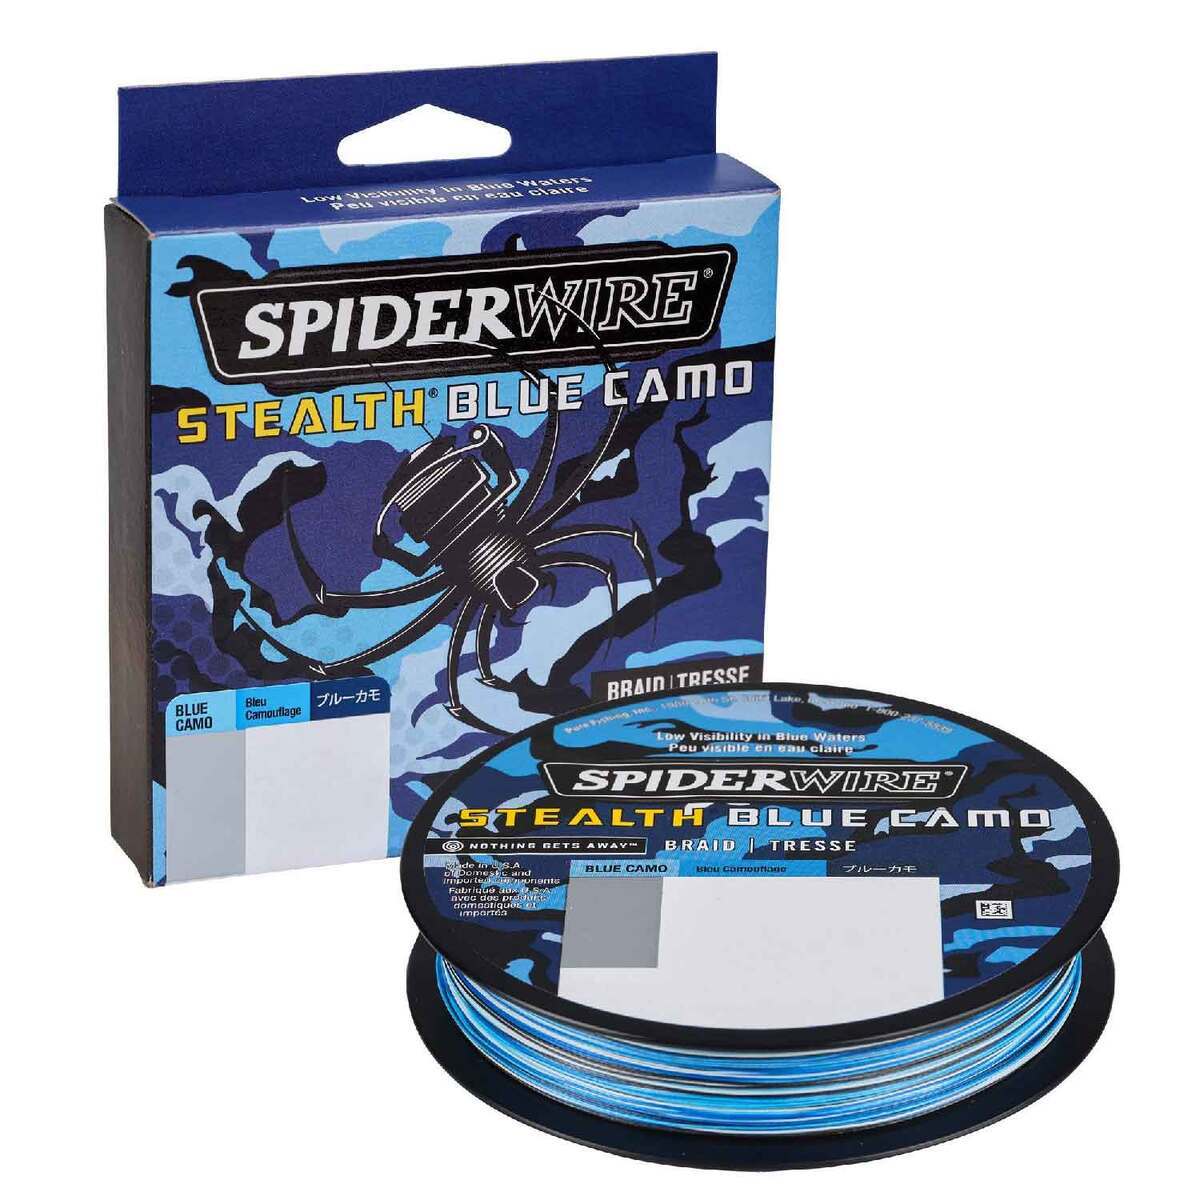 Spiderwire Stealth Smooth 8 Blue Camo Braided 300m All Sizes Fishing Line